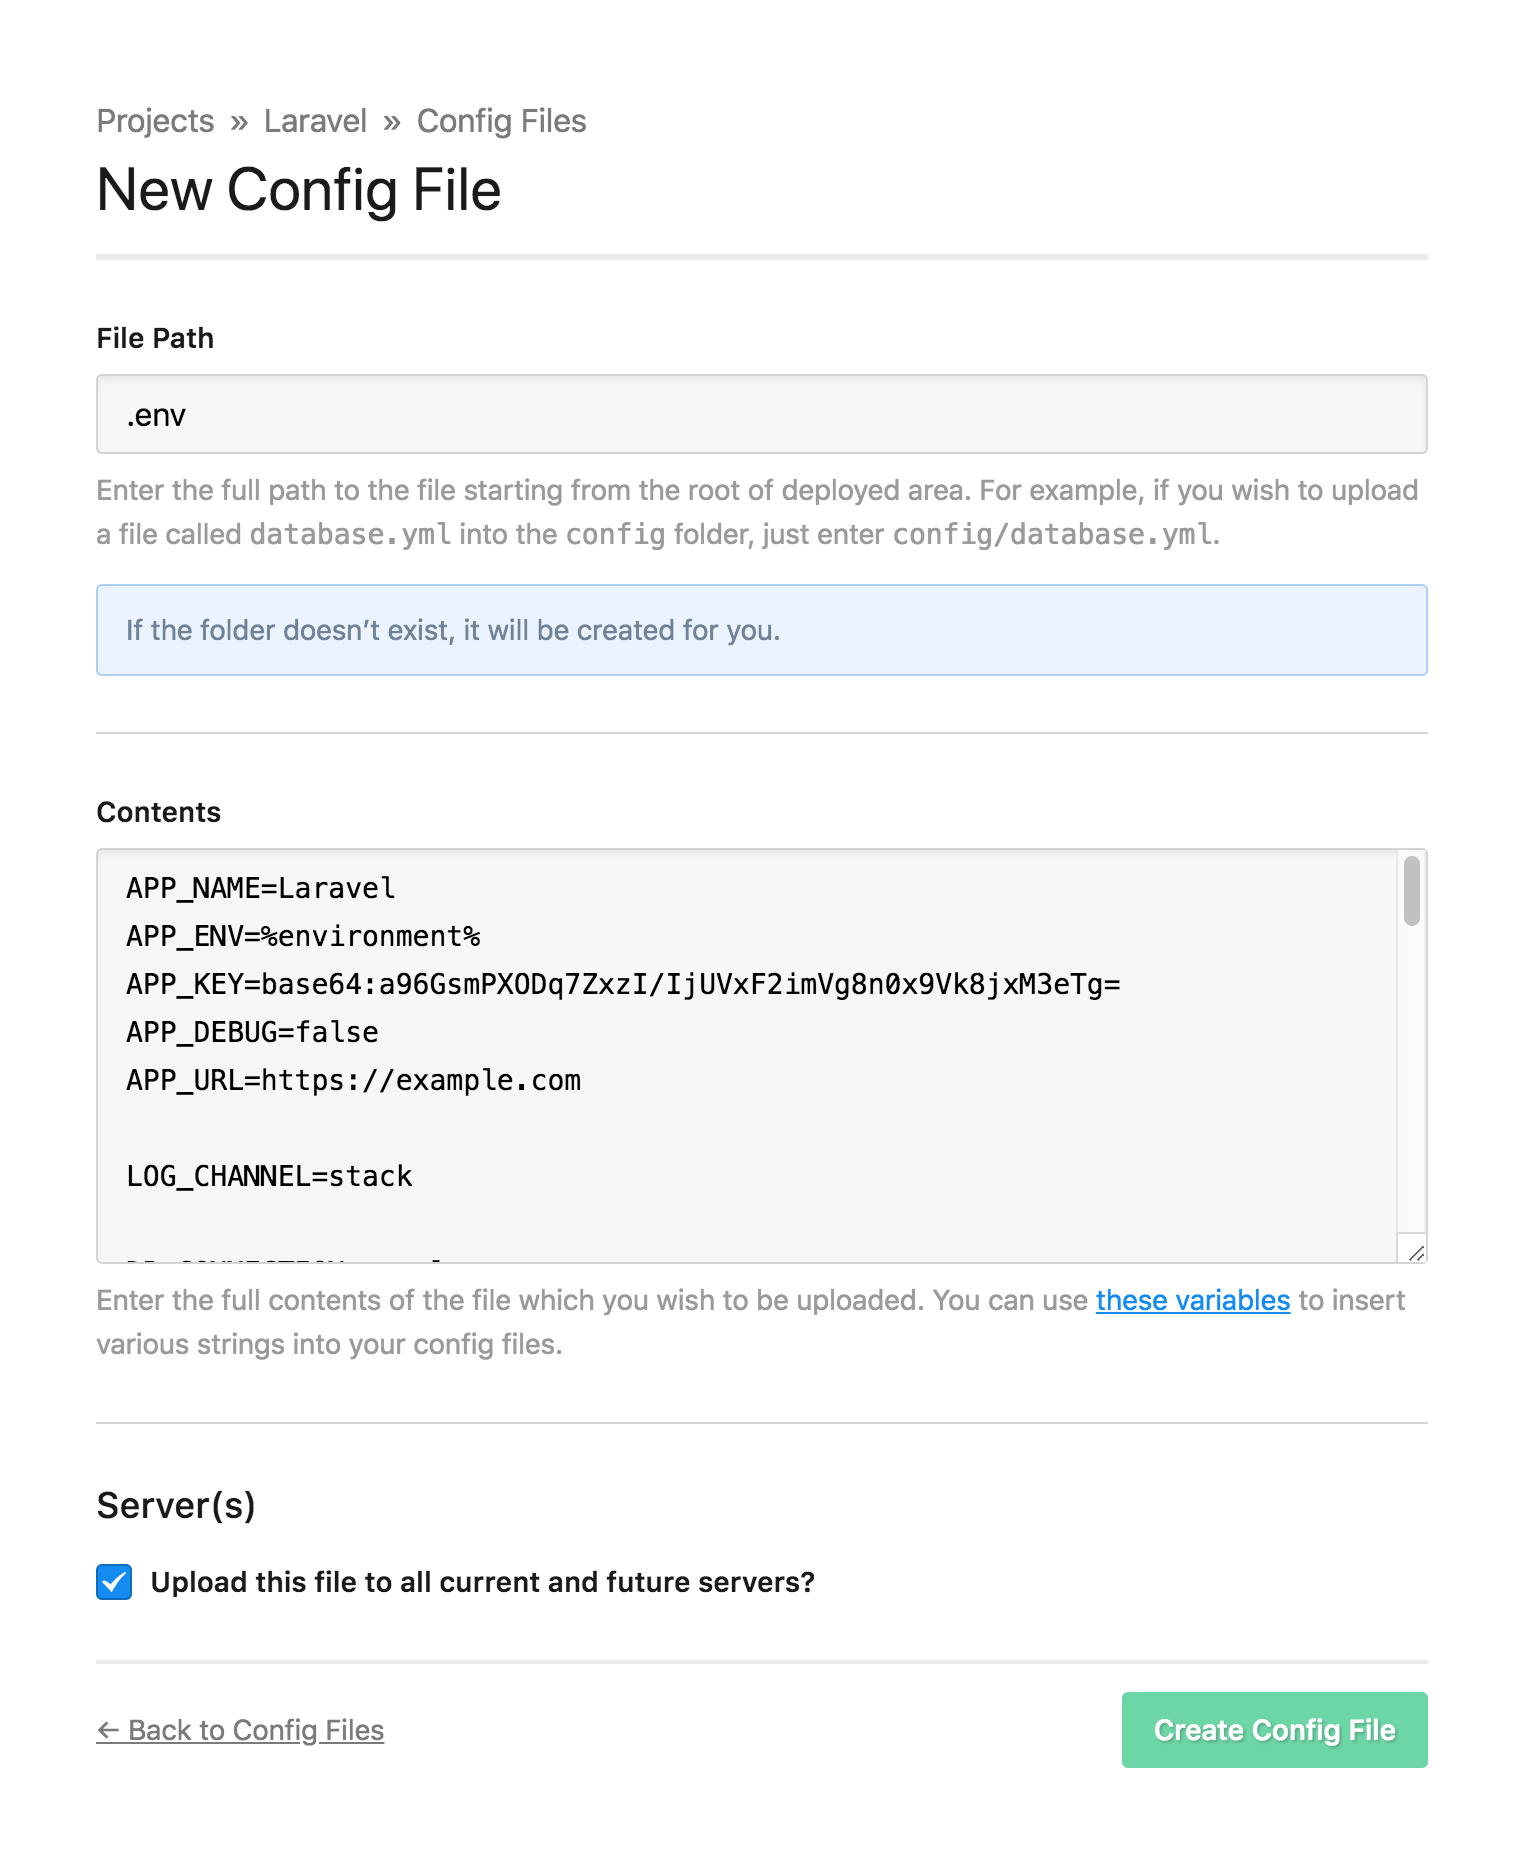 The config file